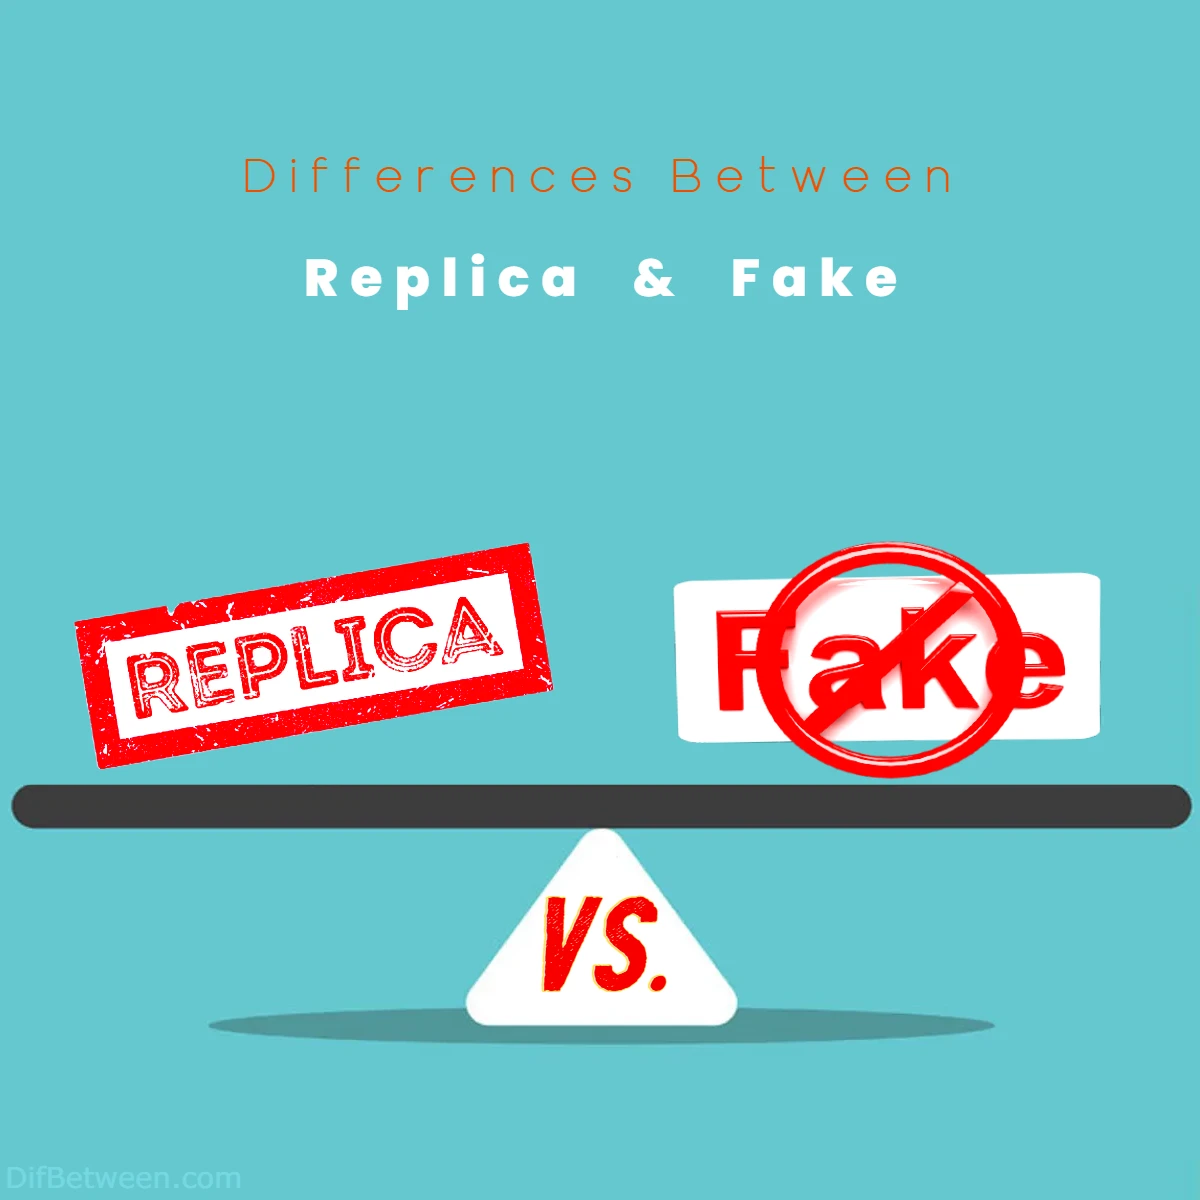 Differences Between Replica vs Fake